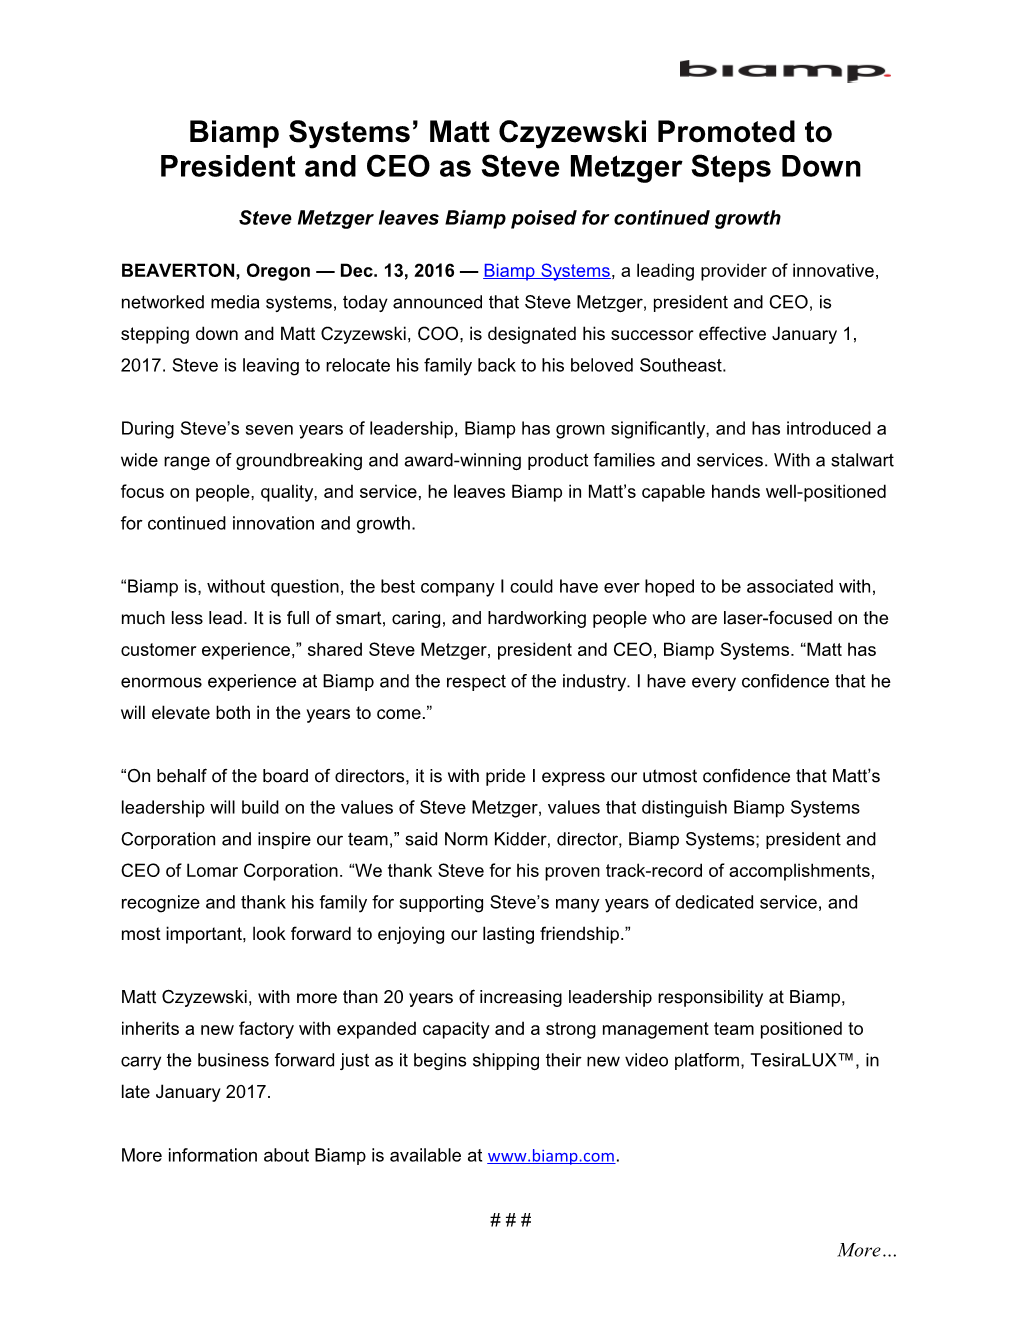 Steve Metzger Leaves Biamp Poised for Continued Growth